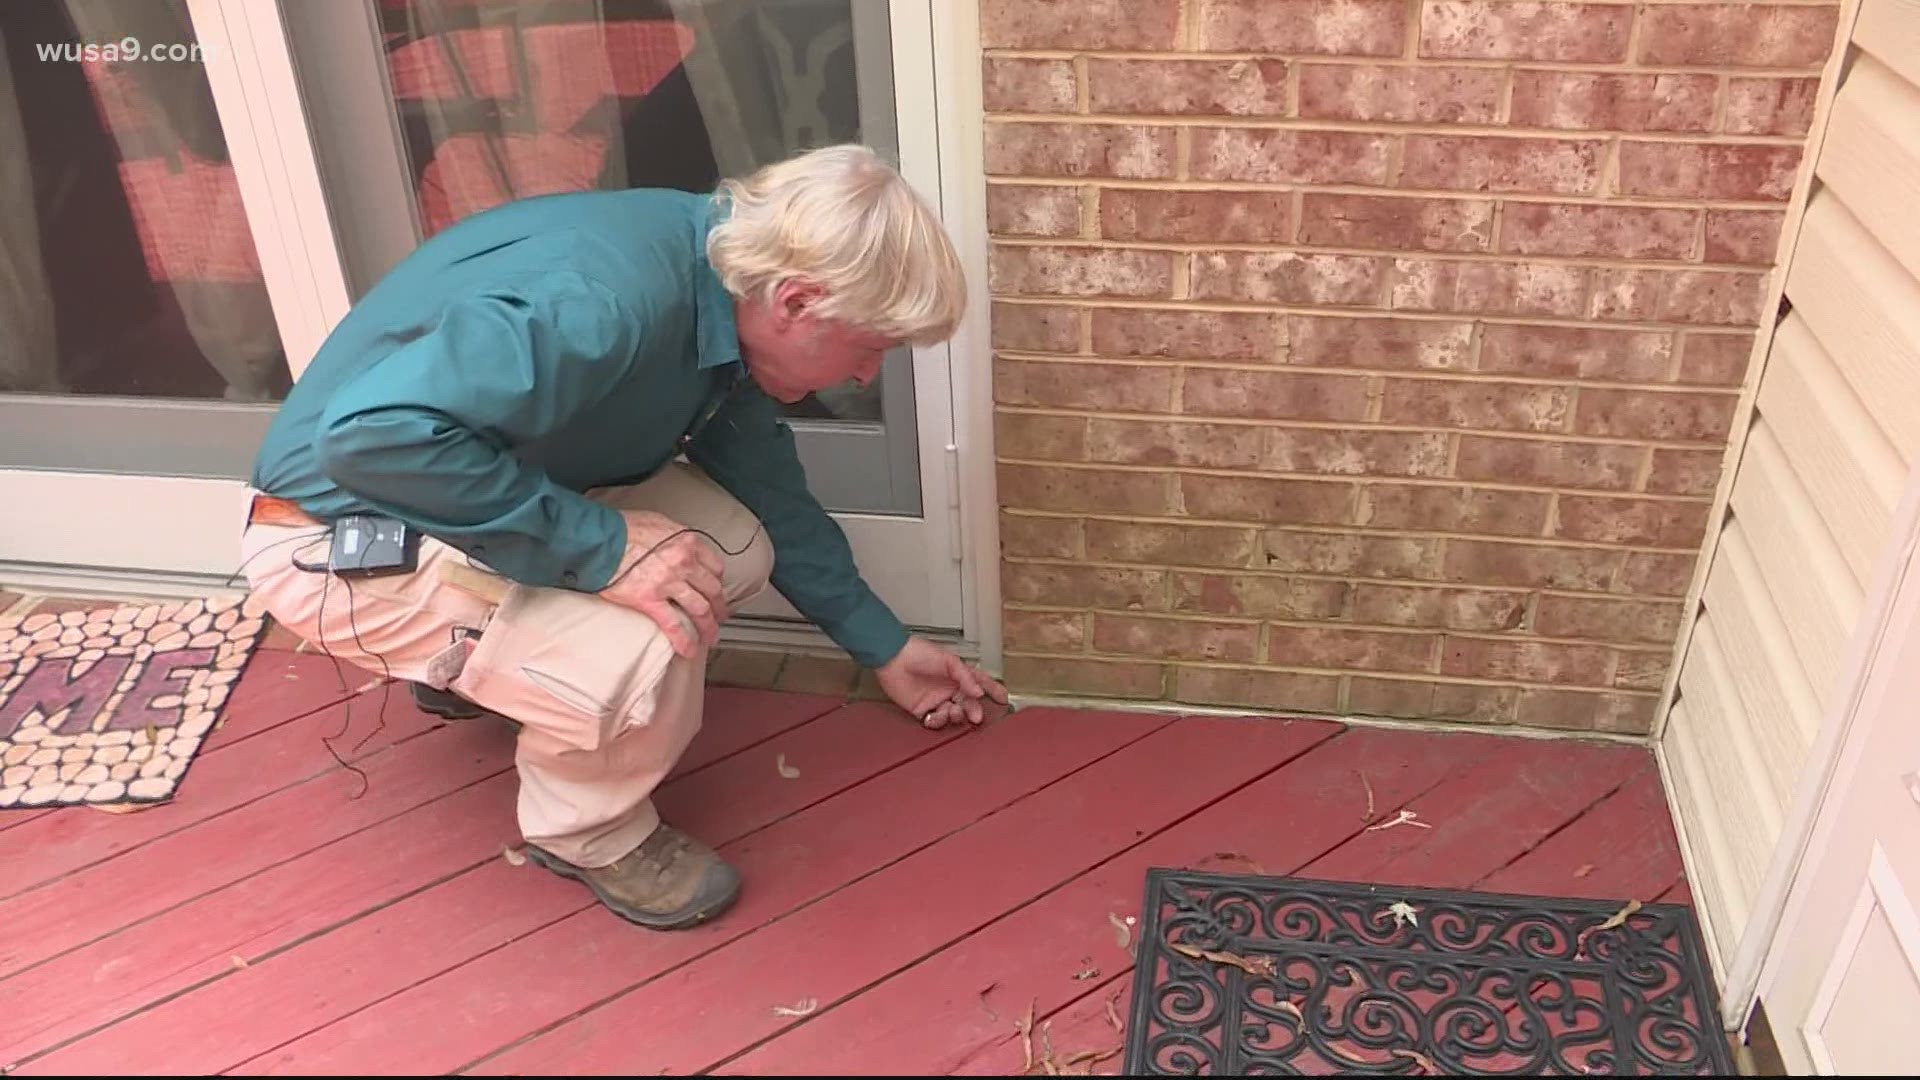 After multiple deck collapses in Montgomery County, a home inspector shares advice on how to make sure your deck is safe.